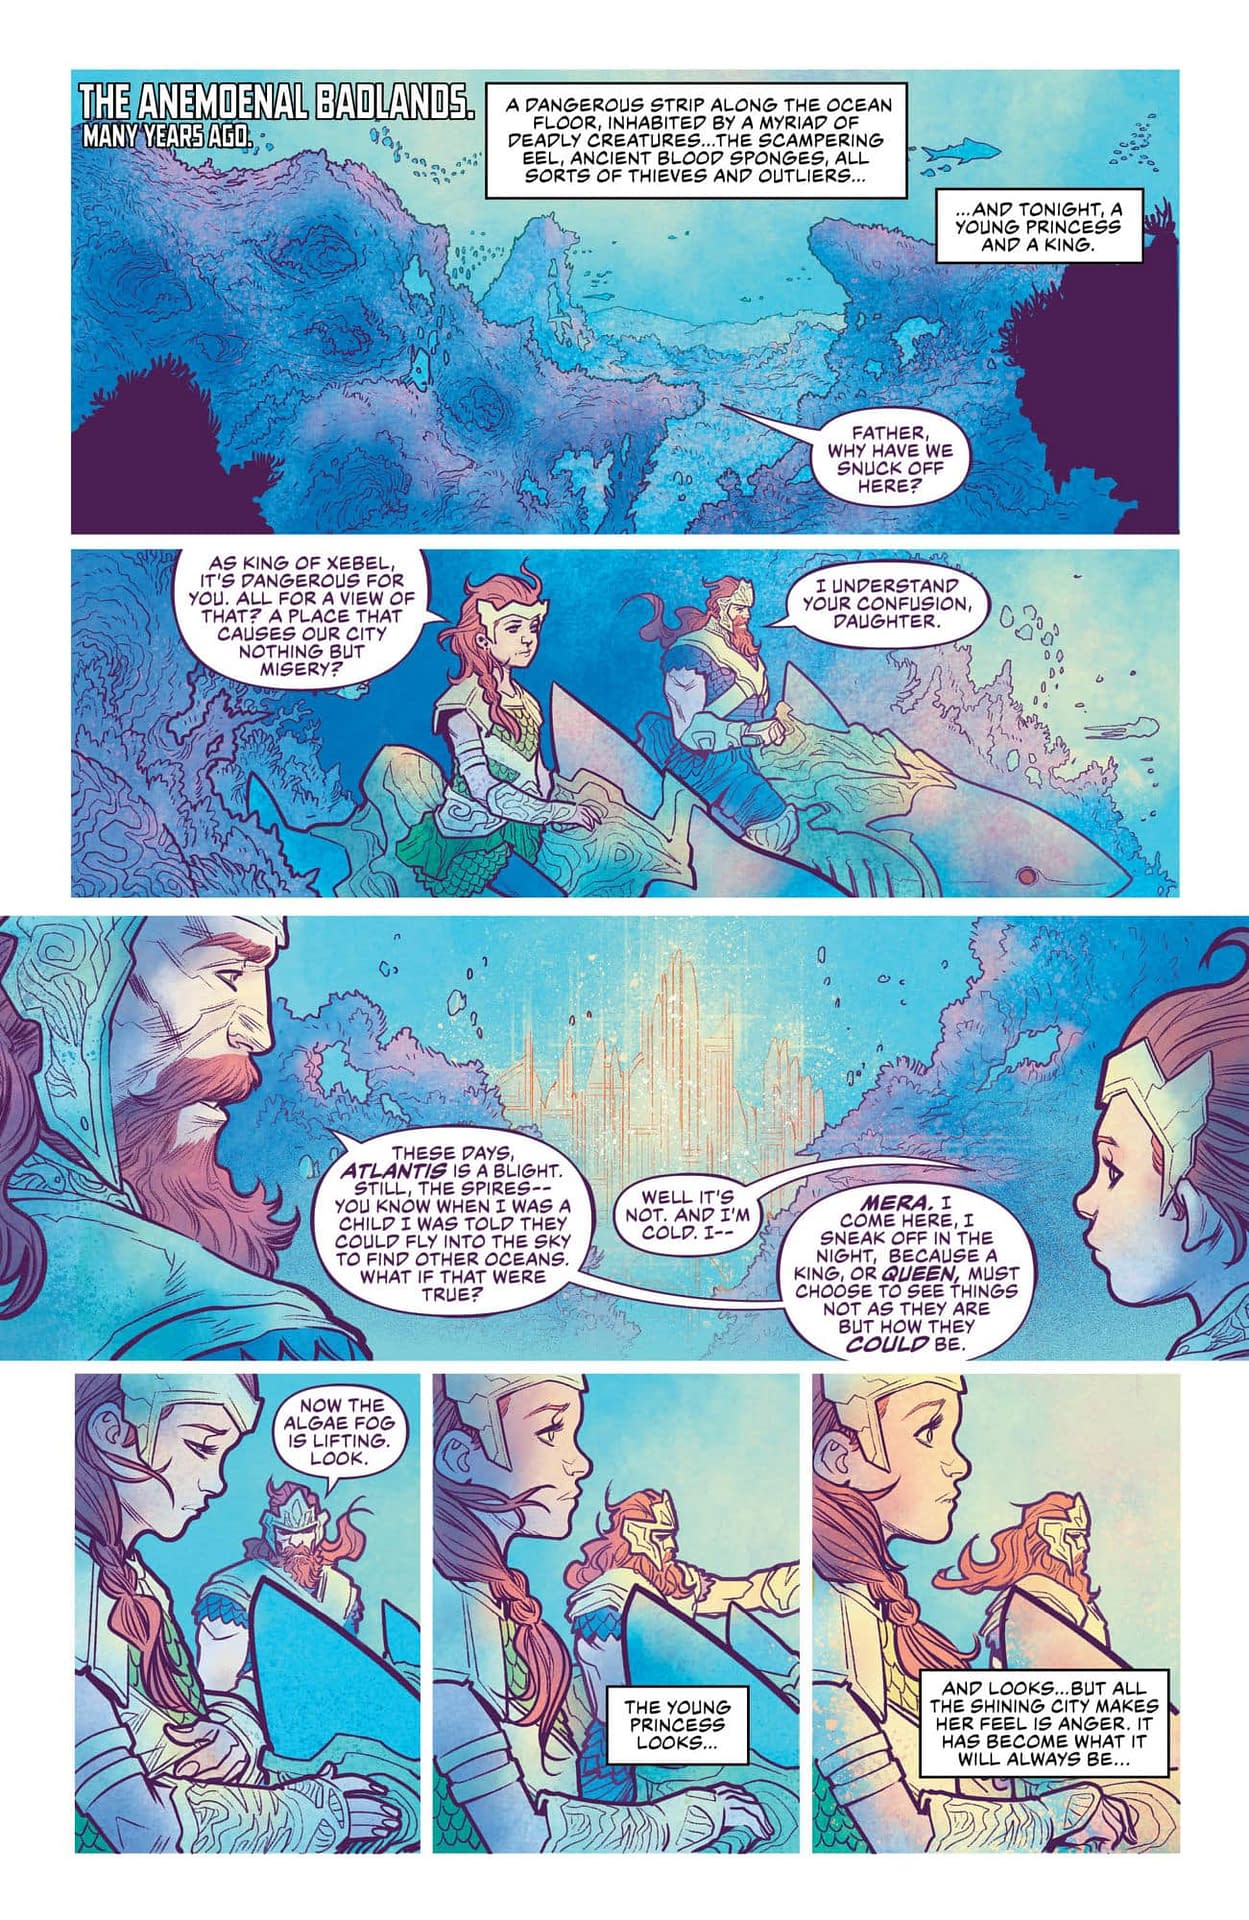 Mera Takes On the Justice Fish in Justice League #11 Preview